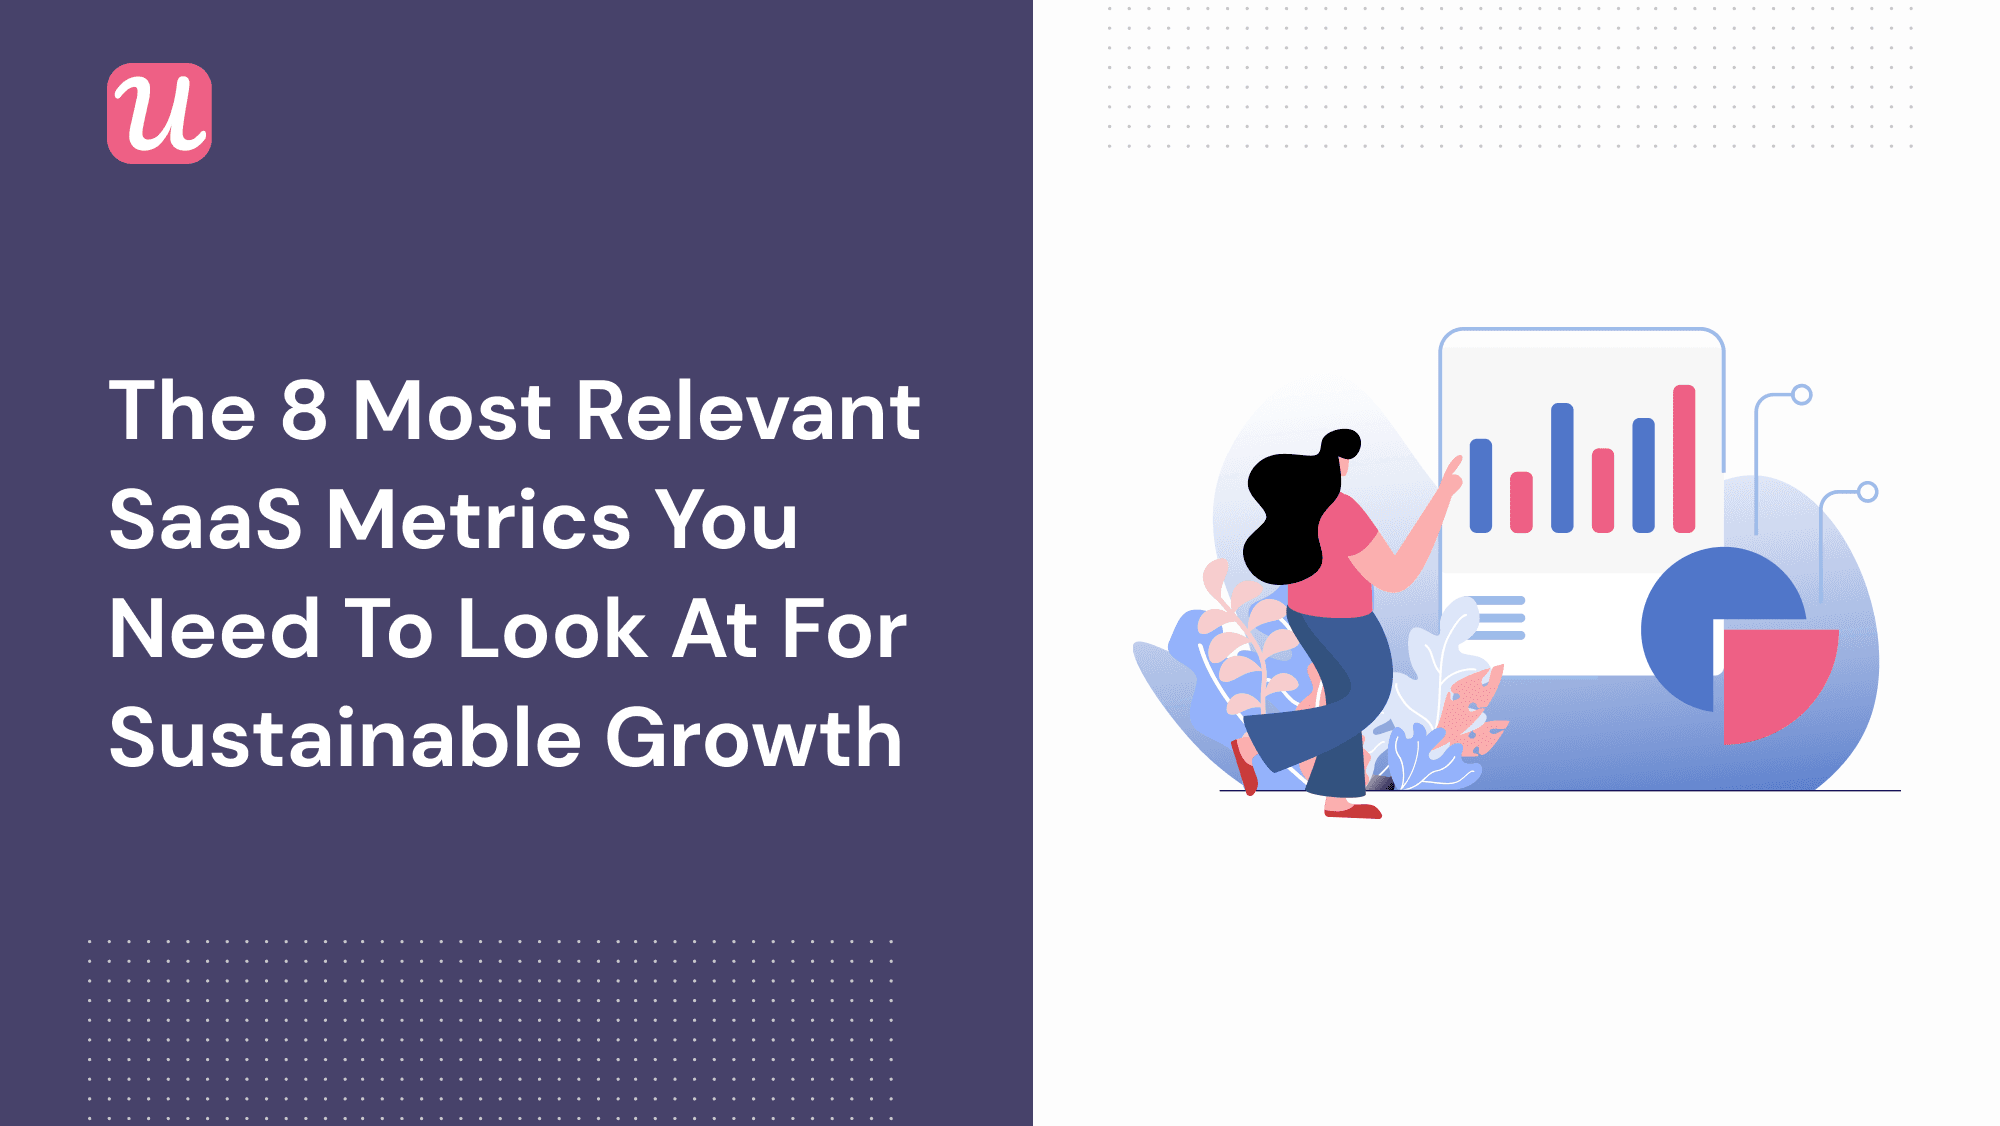 The 8 Most Relevant SaaS Metrics You Need To Look At For Sustainable Growth